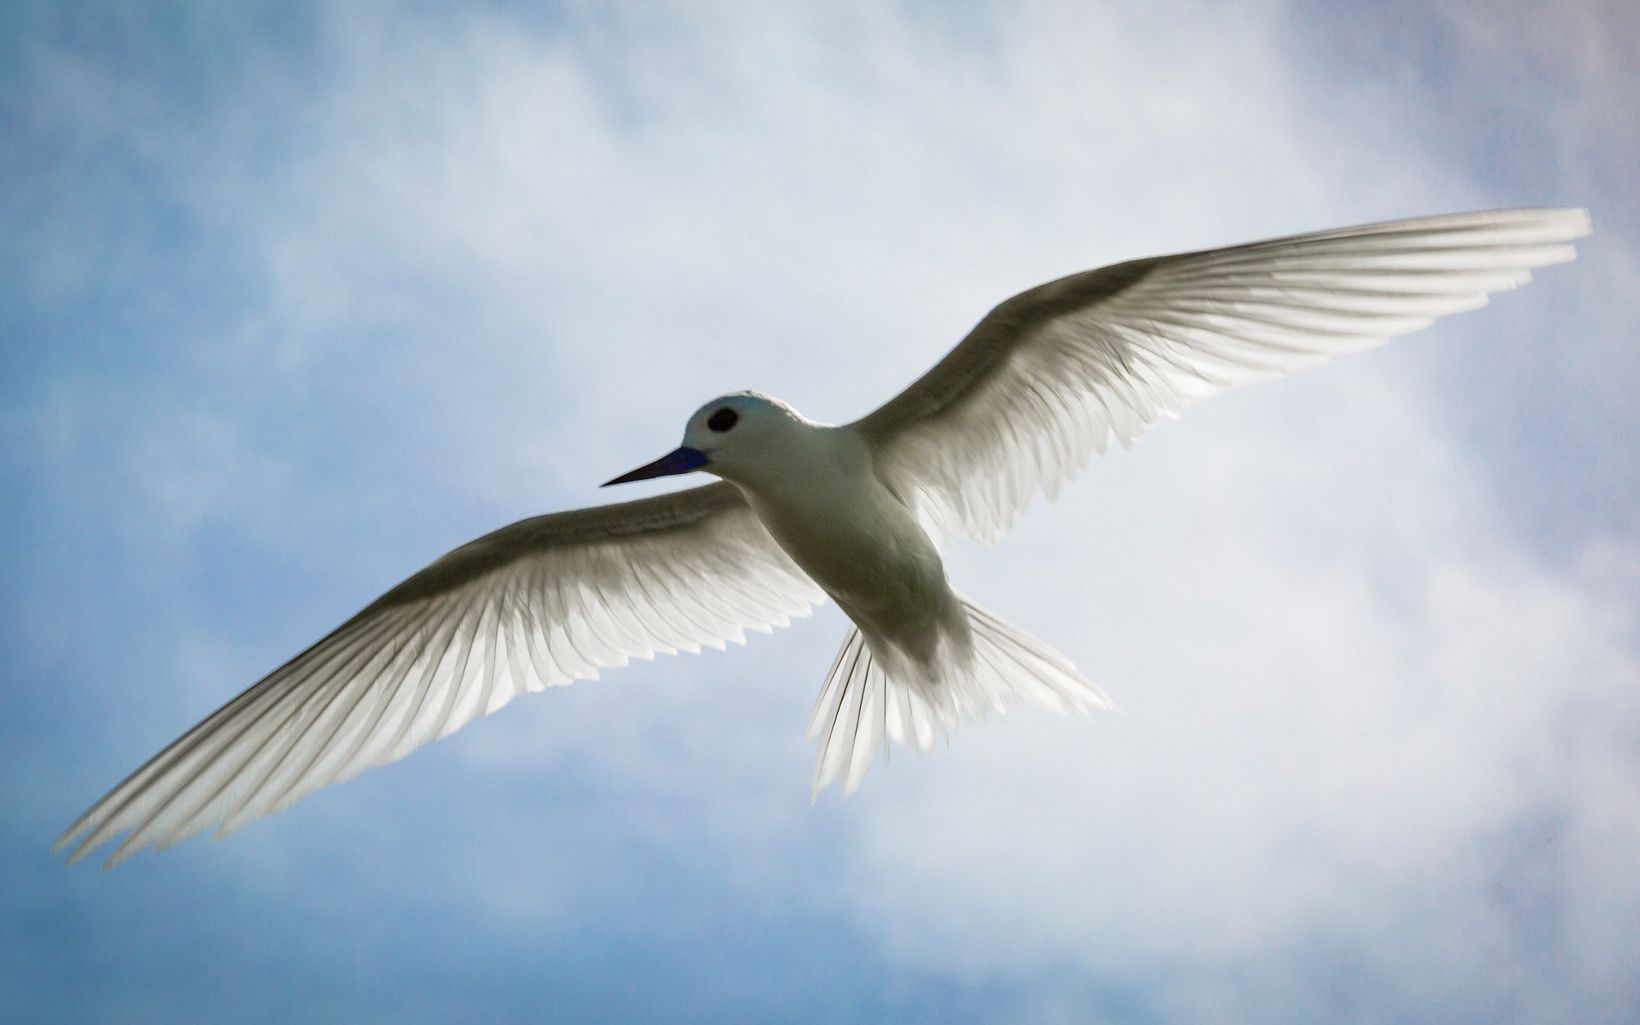 A white tern (Gygis alba) with open wings backlit against a sunny sky.